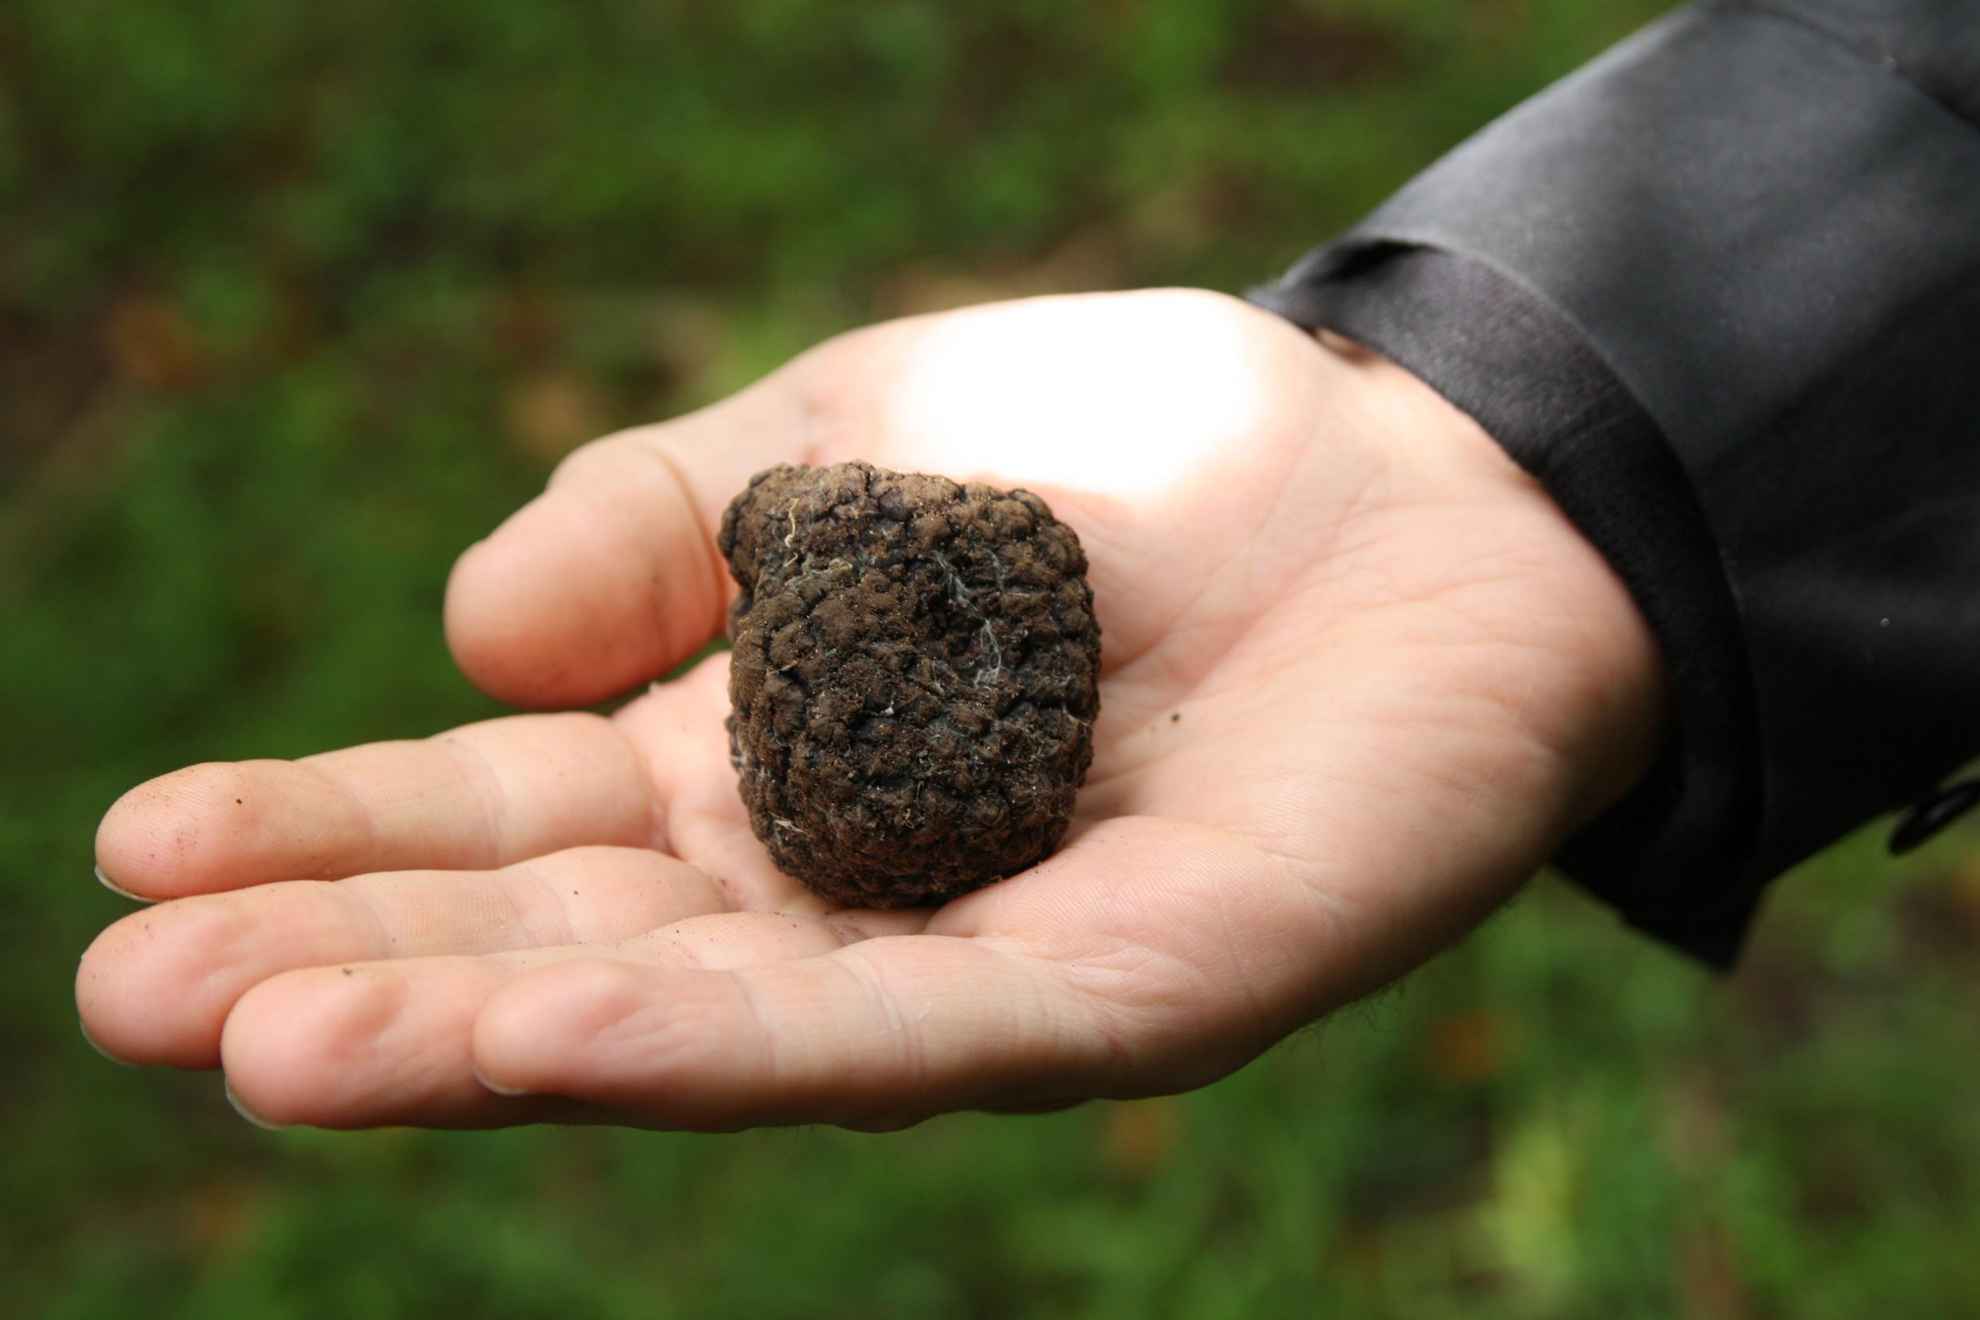 Someone is holding a black truffle in their hand.